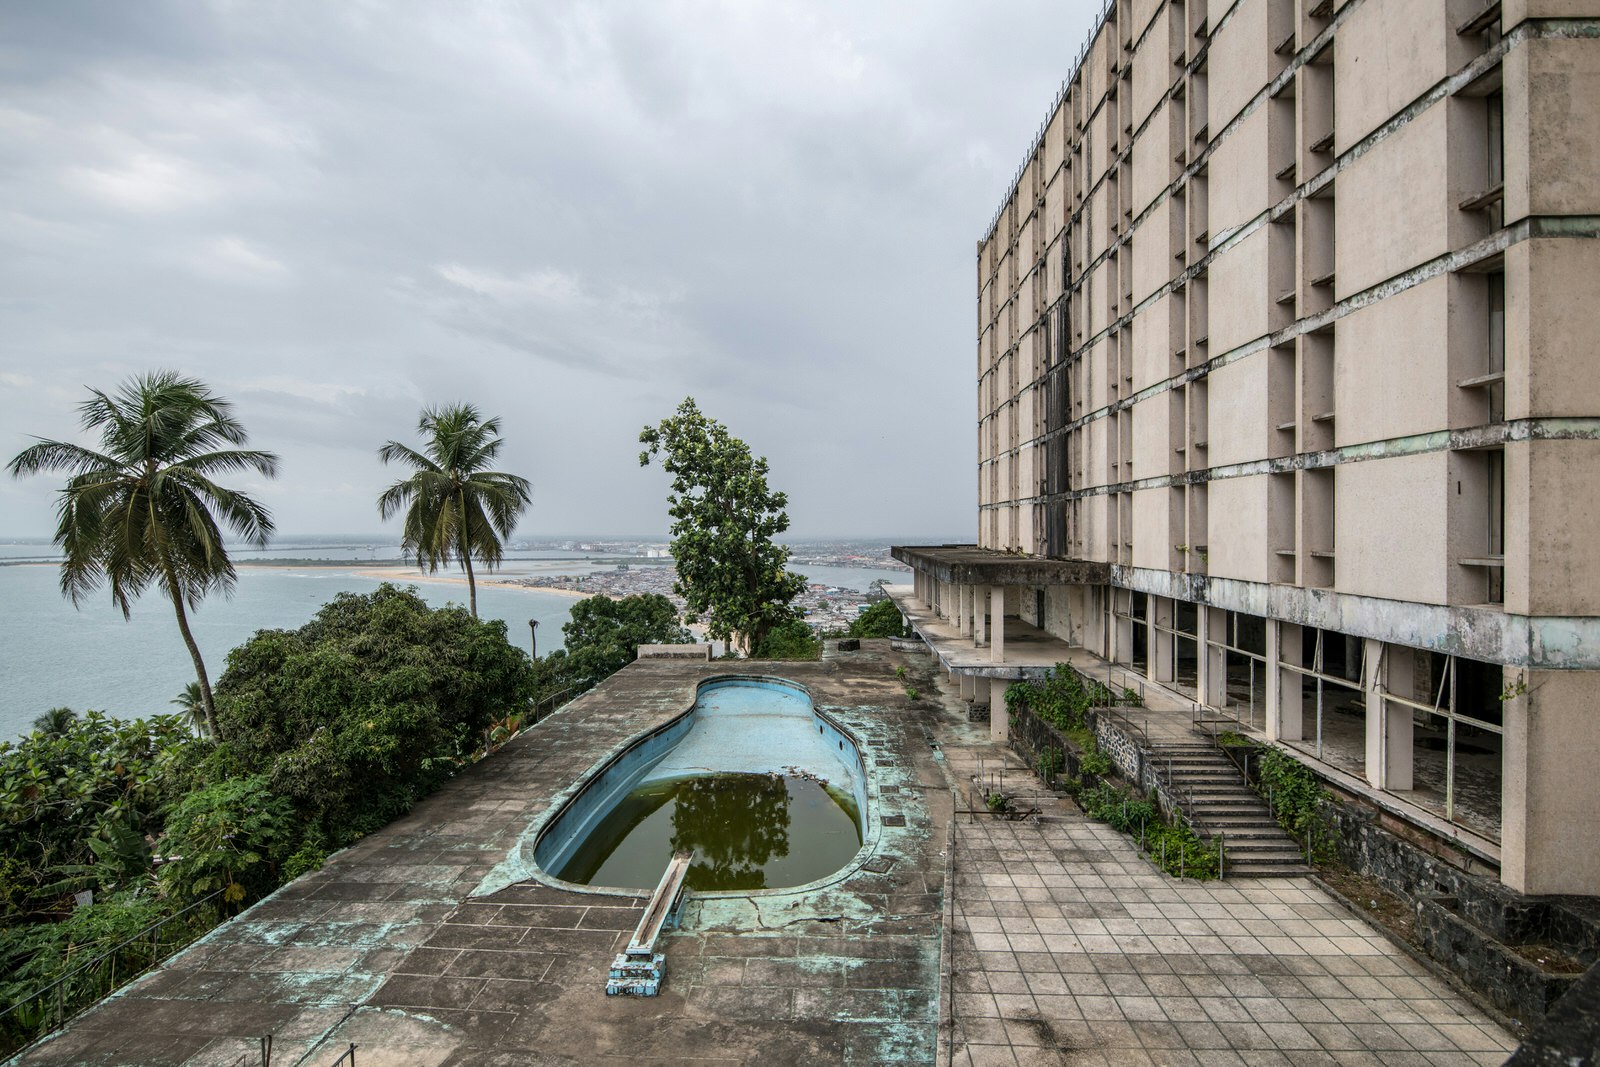 The overgrown remains of the Hotel Ducor stand atop a hill that looks over the ocean the Monrovia; the concrete tile deck features an algae filled swimming pool